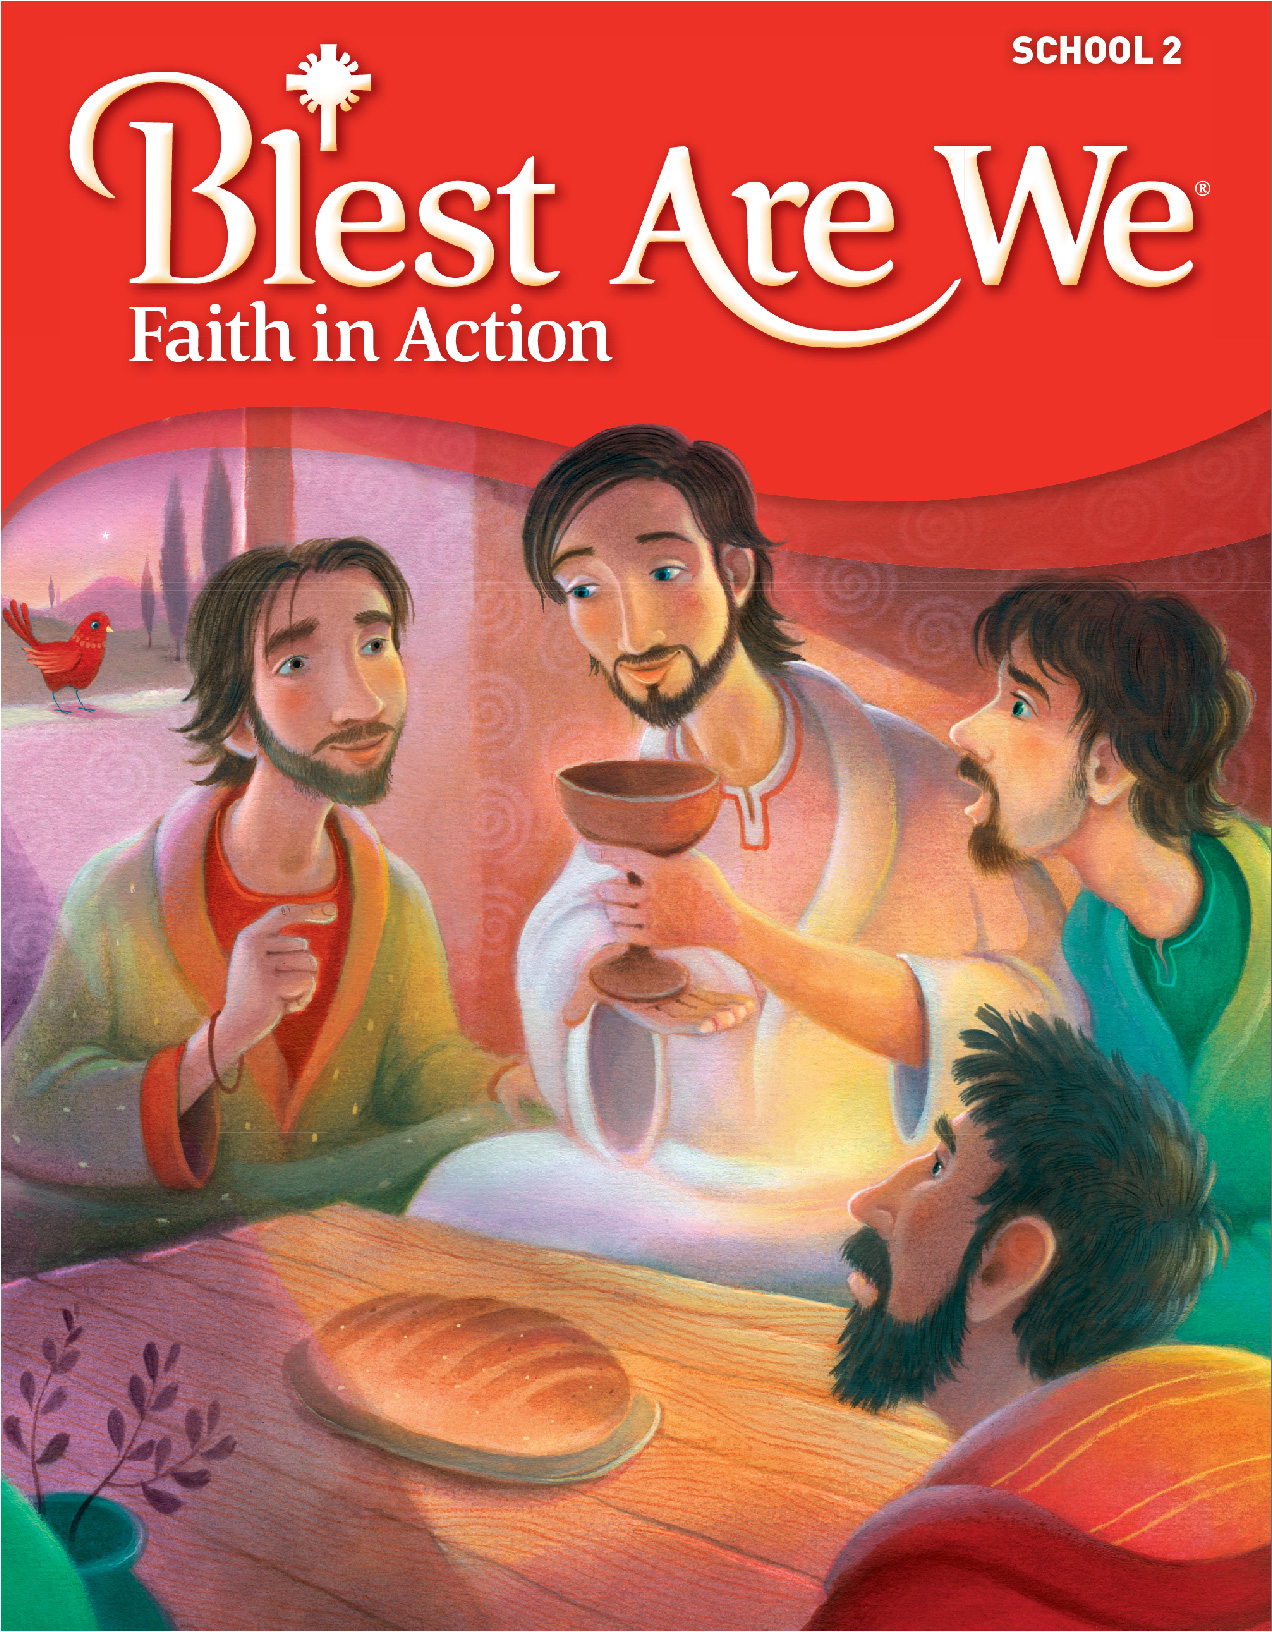 Book cover of Blest Are We, Faith in Action, School 2, with men sitting at a table with bread and wine